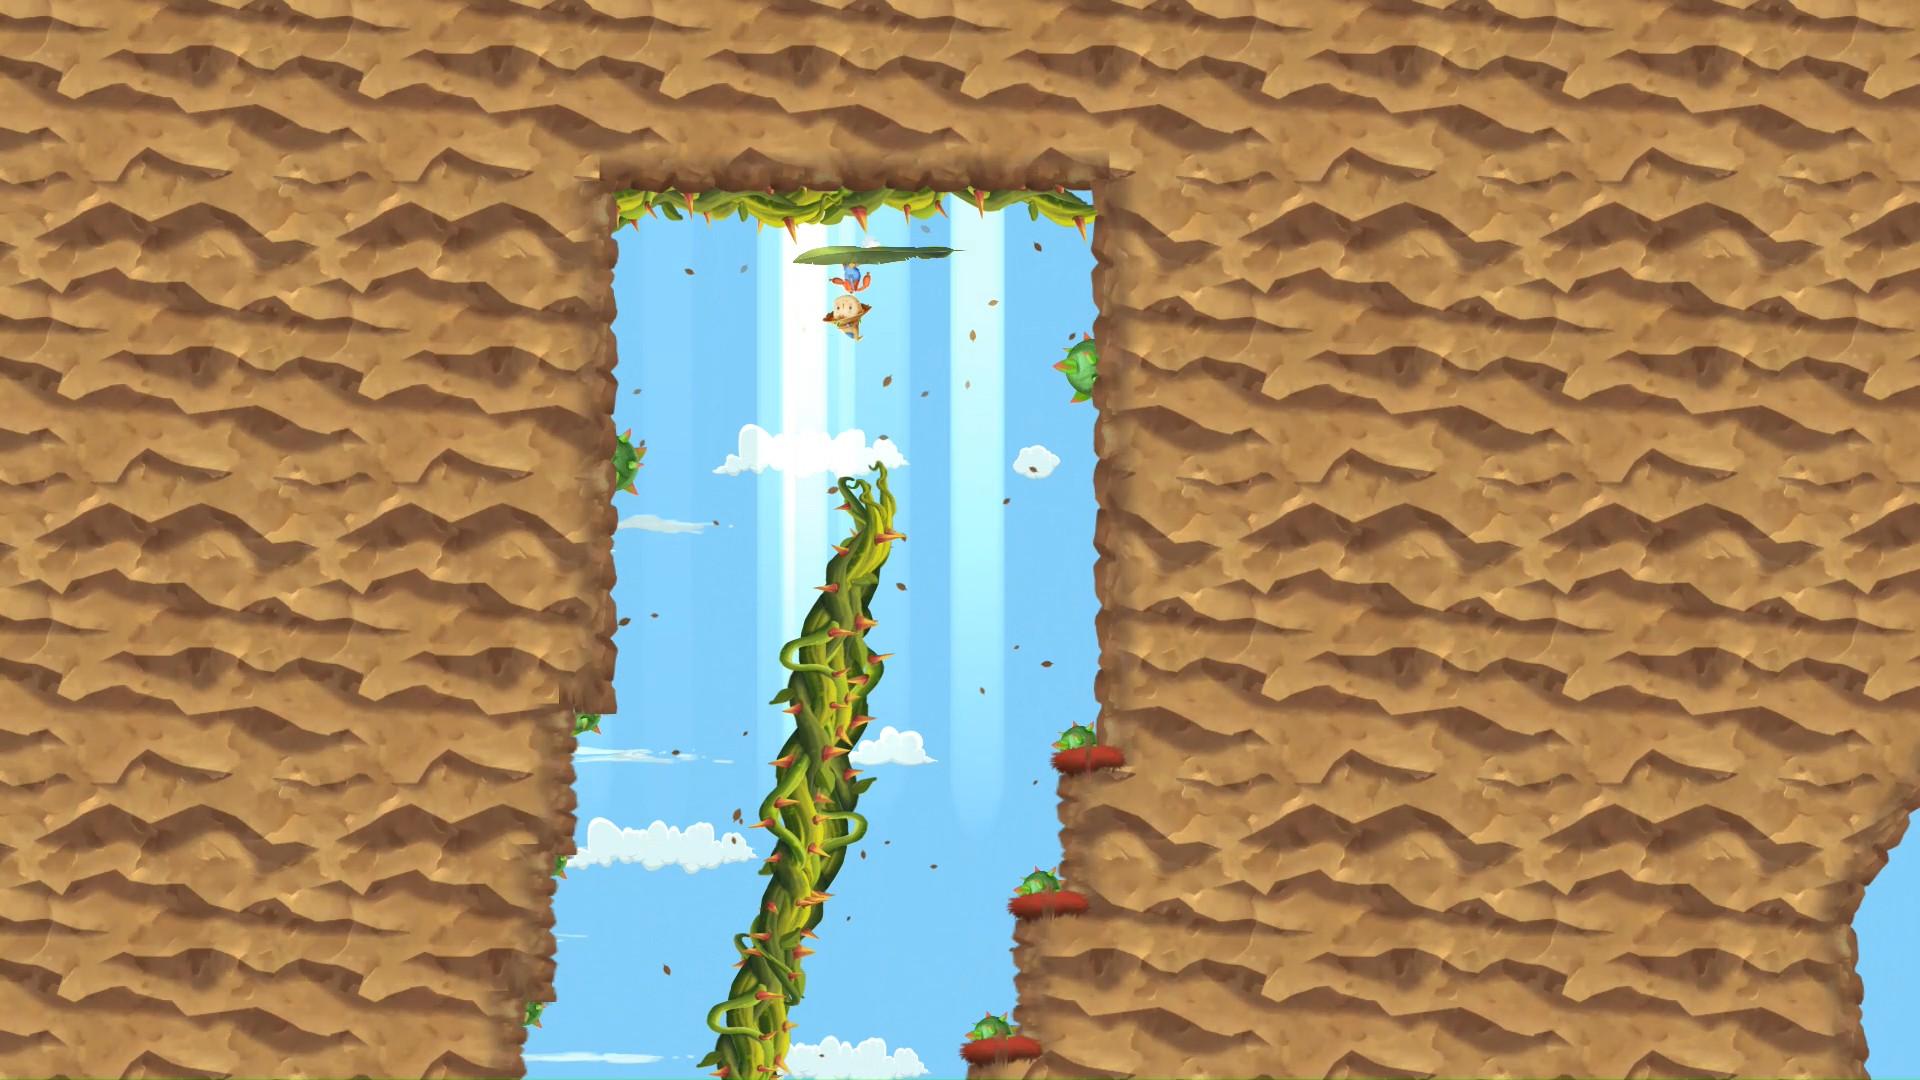 Screenshot №7 from game Upside Down